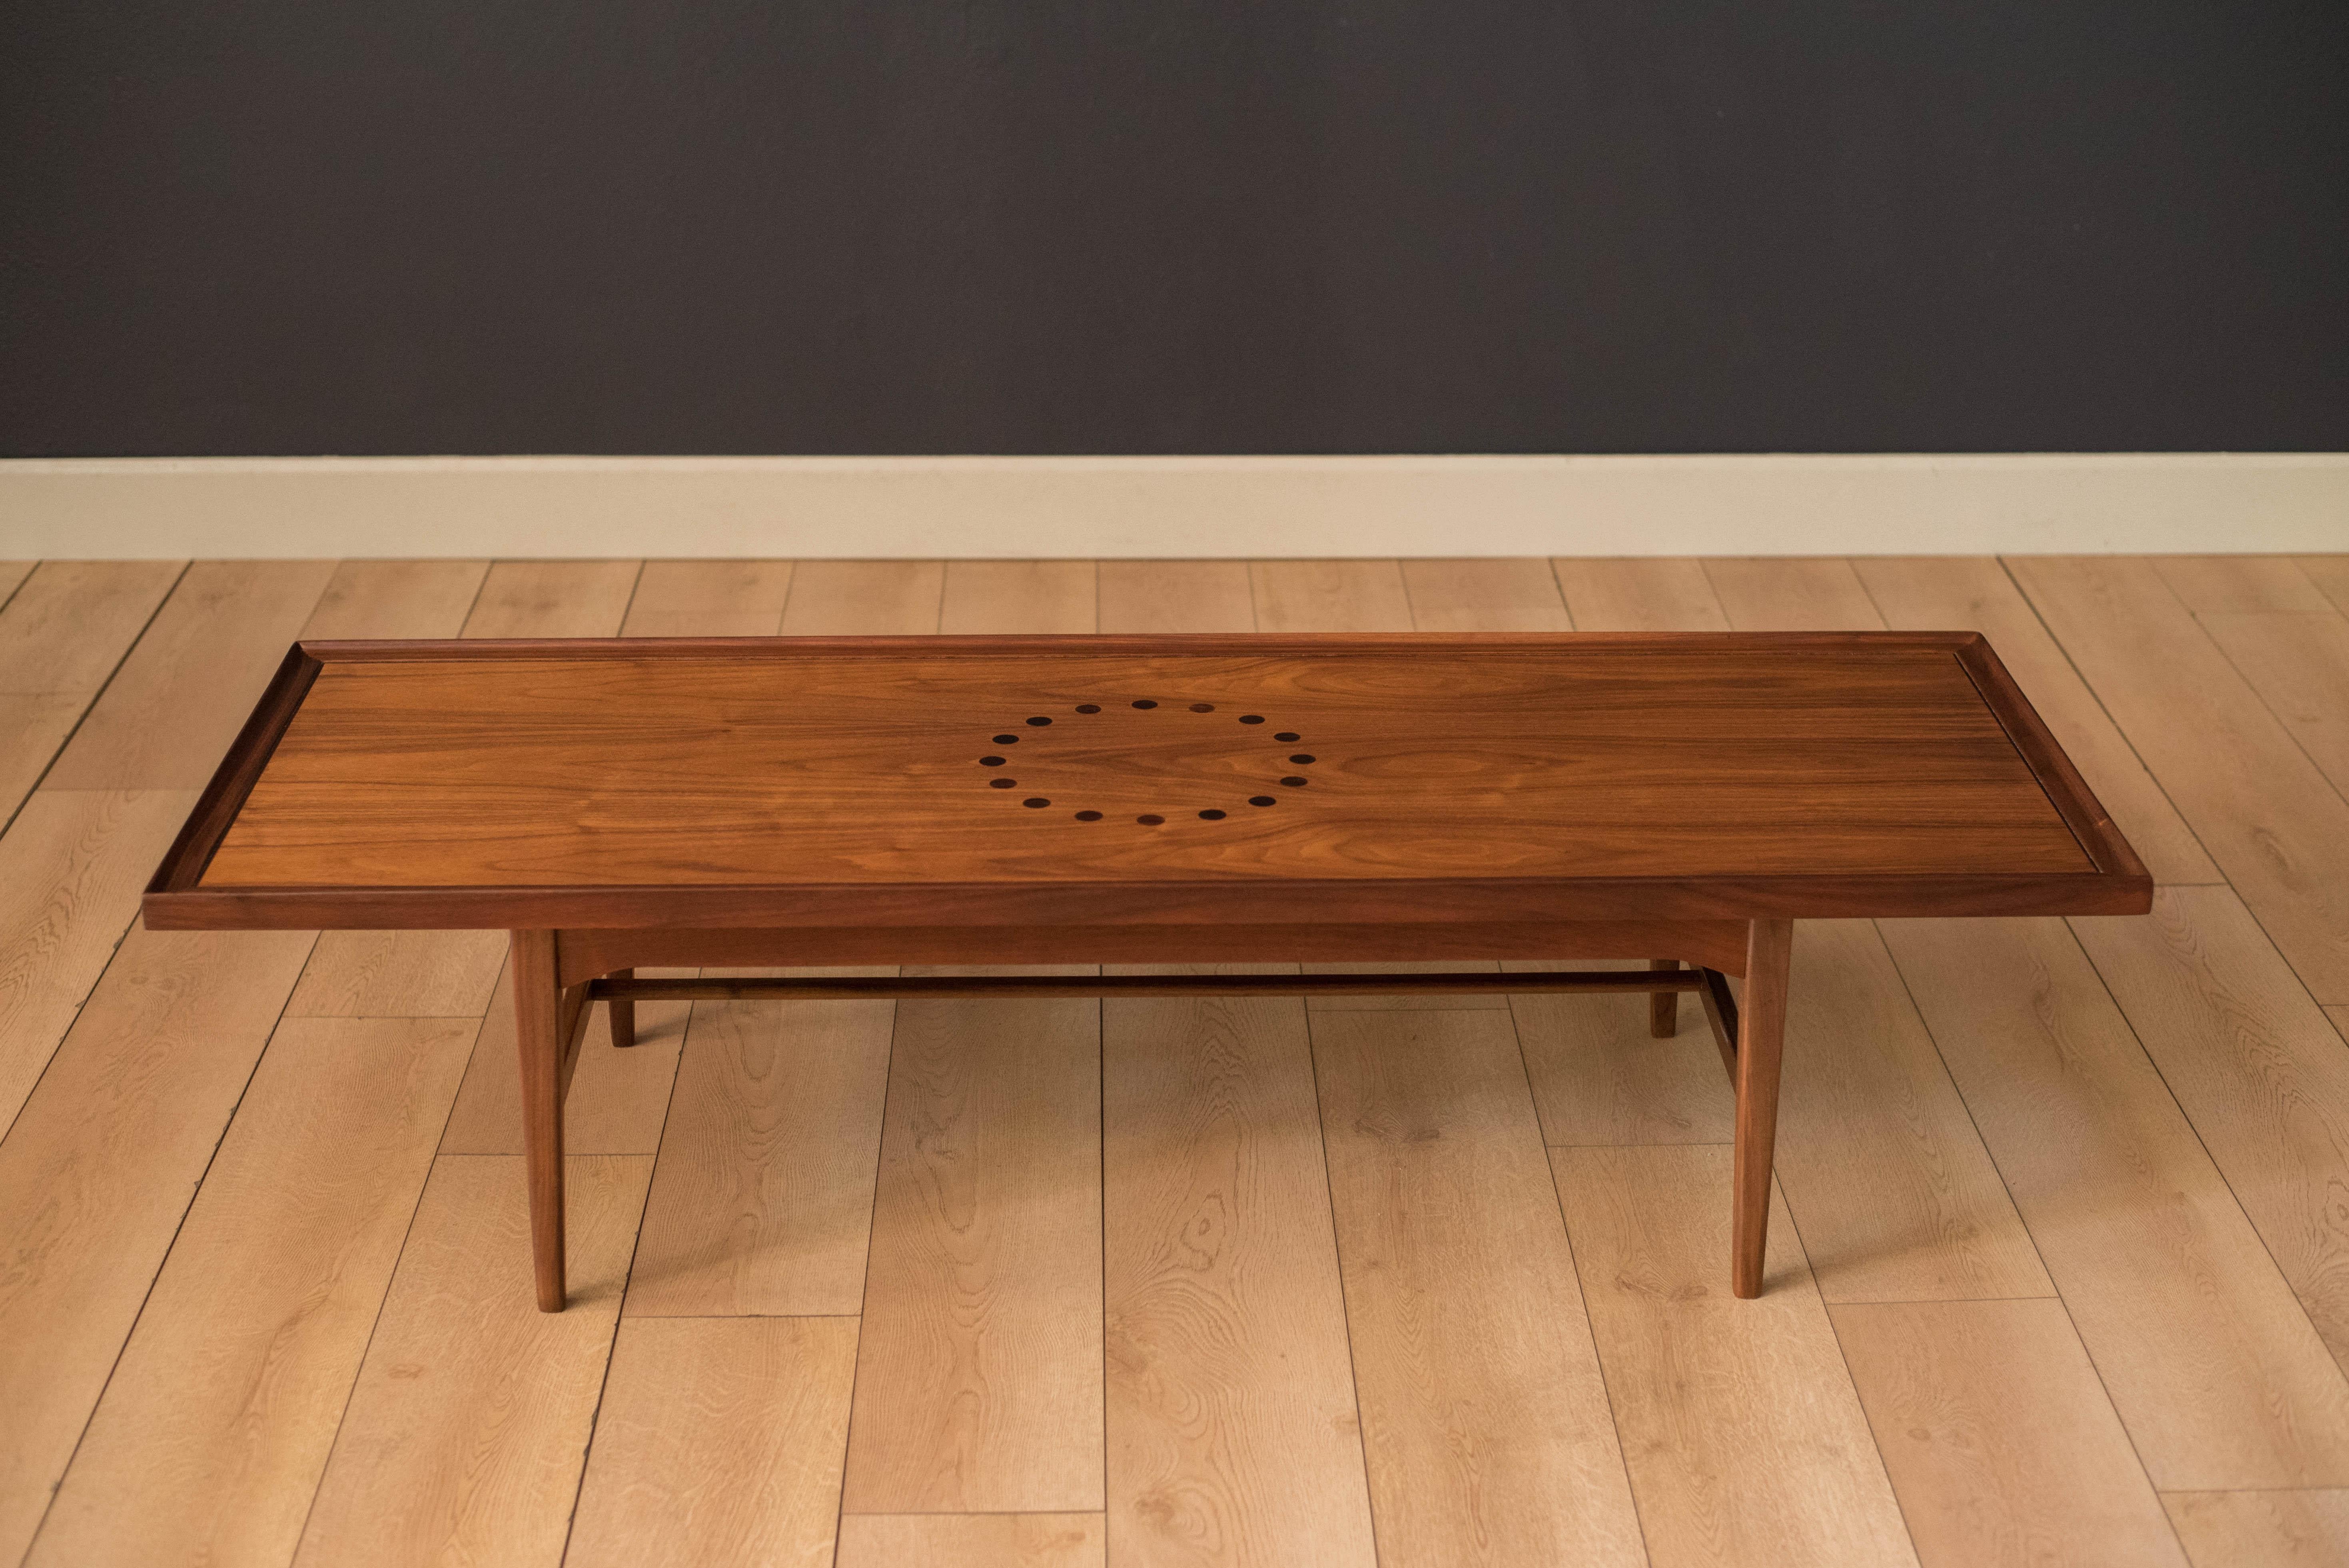 Vintage coffee table from the Declaration collection designed by Kipp Stewart & Stewart McDougall for Drexel Furniture Co. in walnut. This piece features rosewood inlay and a raised edge tabletop. Supporting base is constructed with tapered legs and